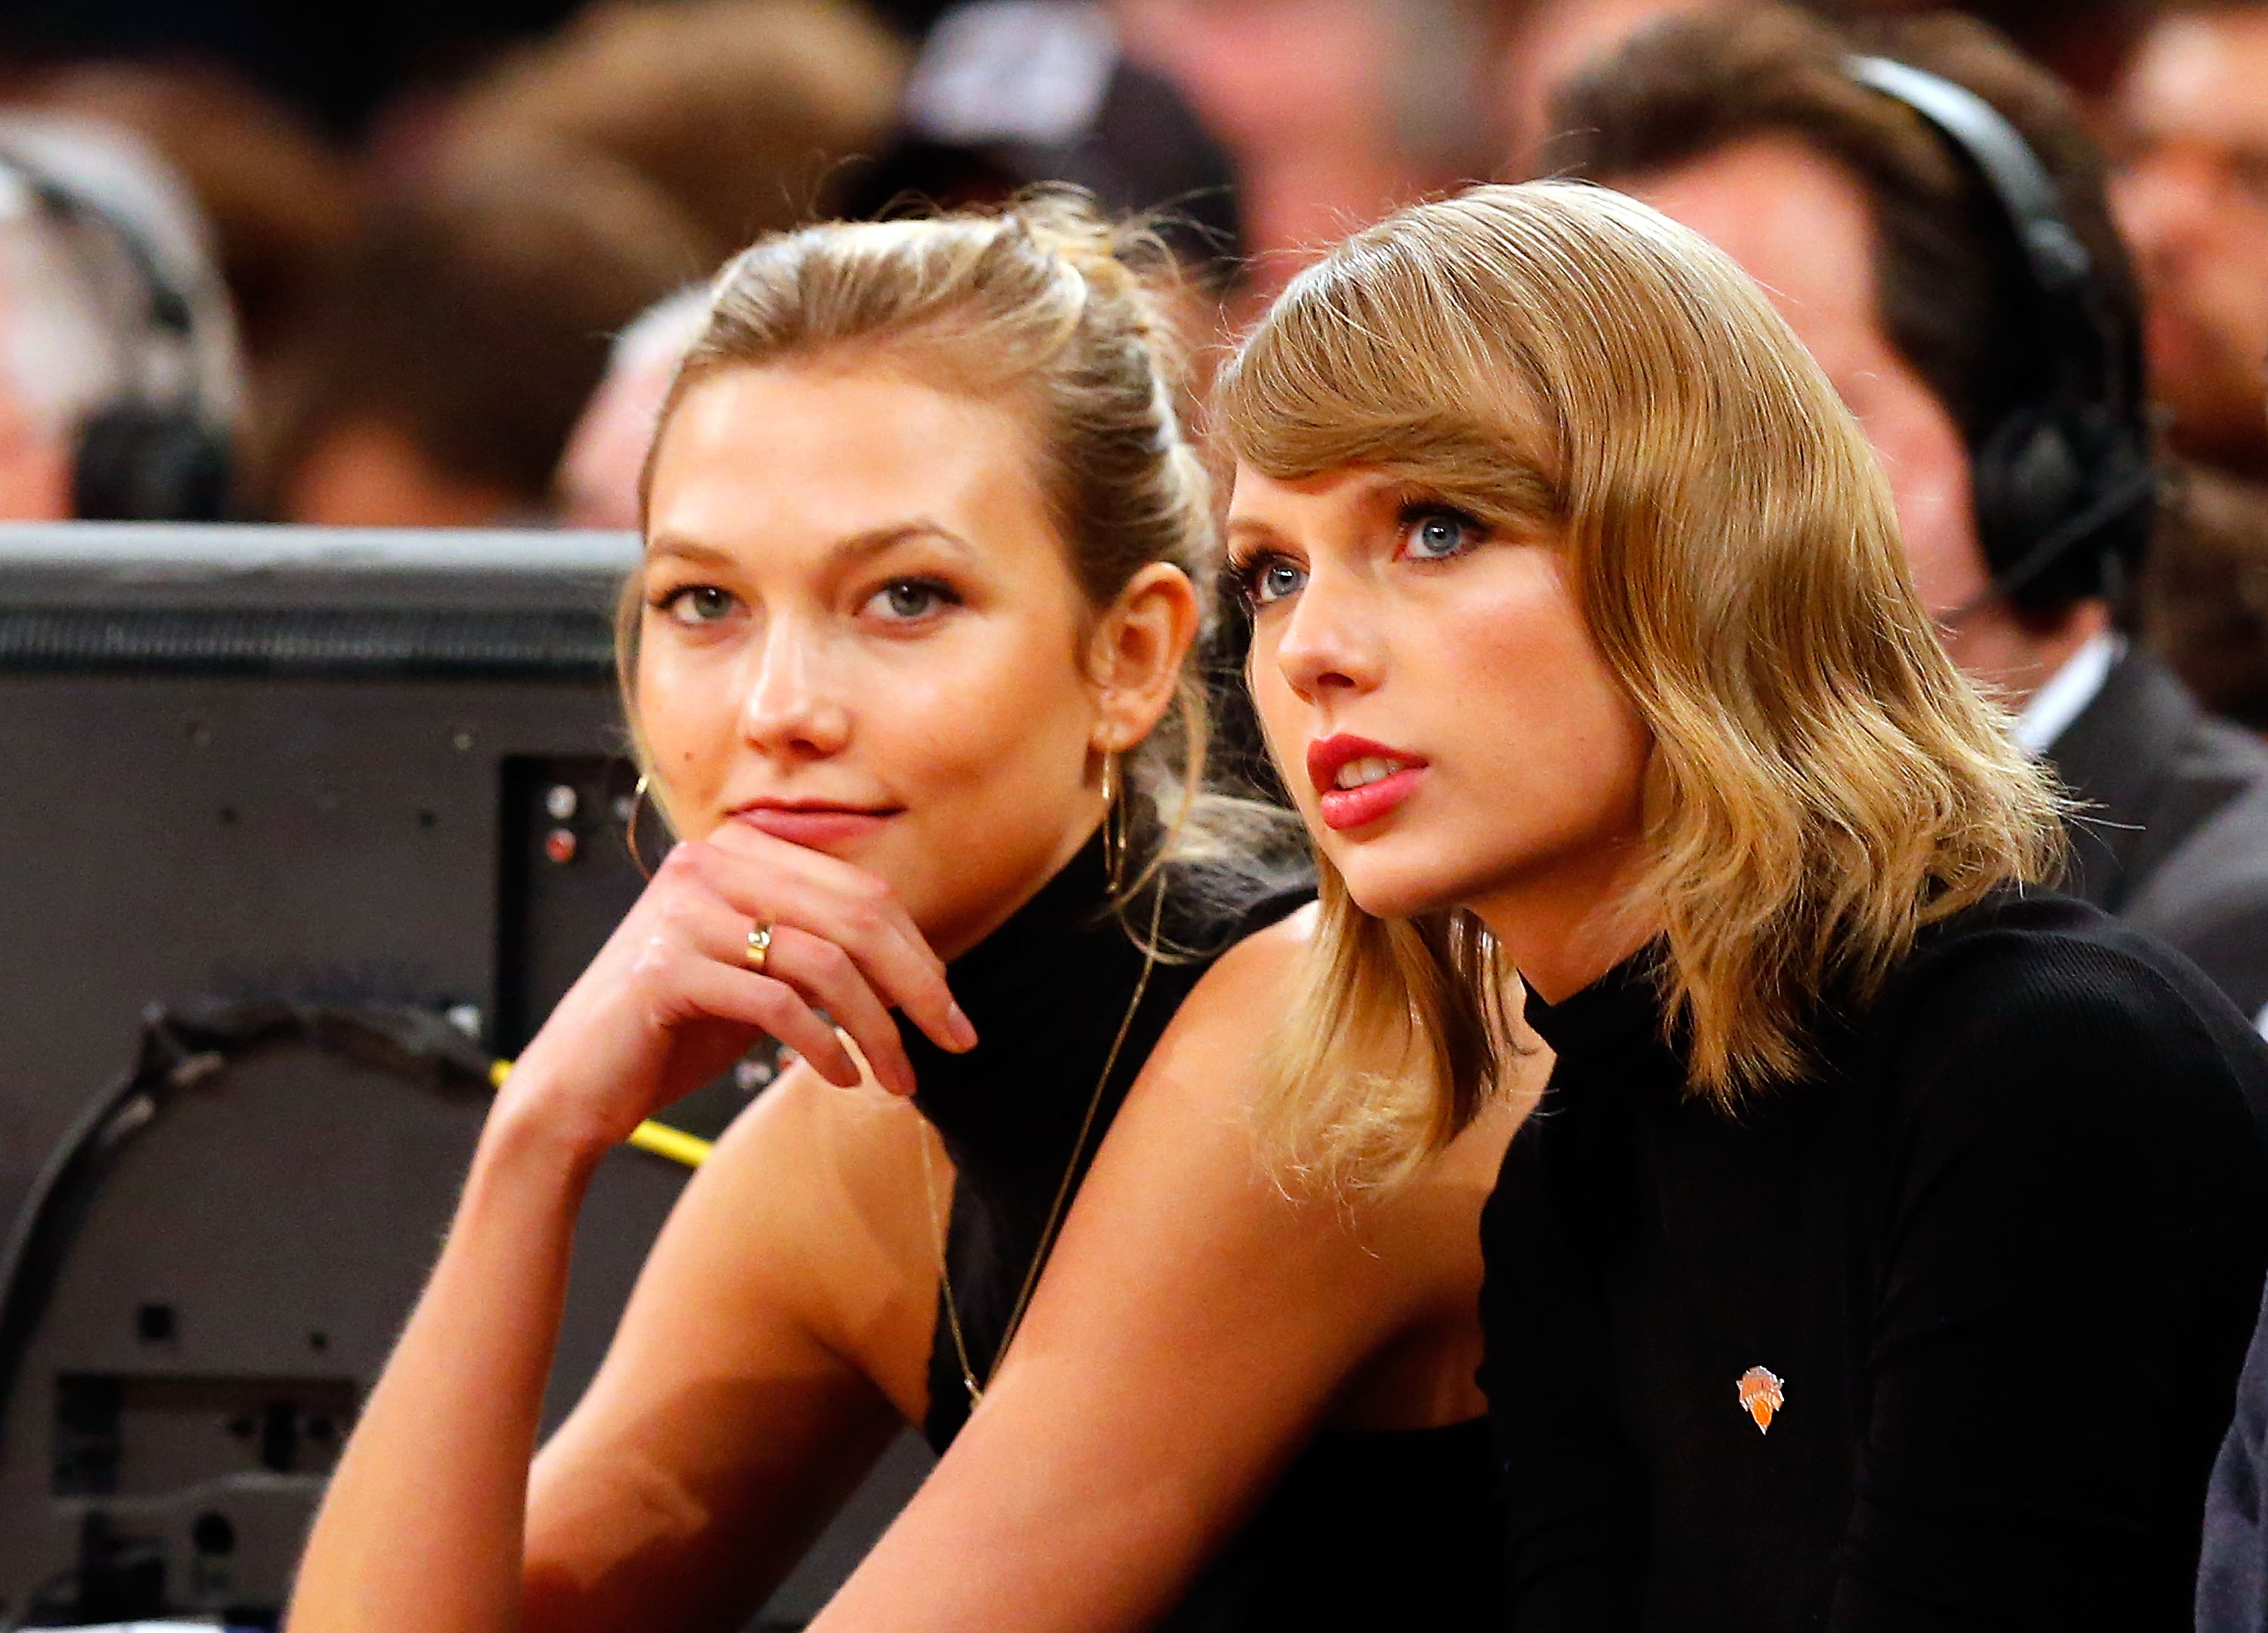 What Happened Between Taylor Swift, Karlie Kloss? Model Spotted at Concert